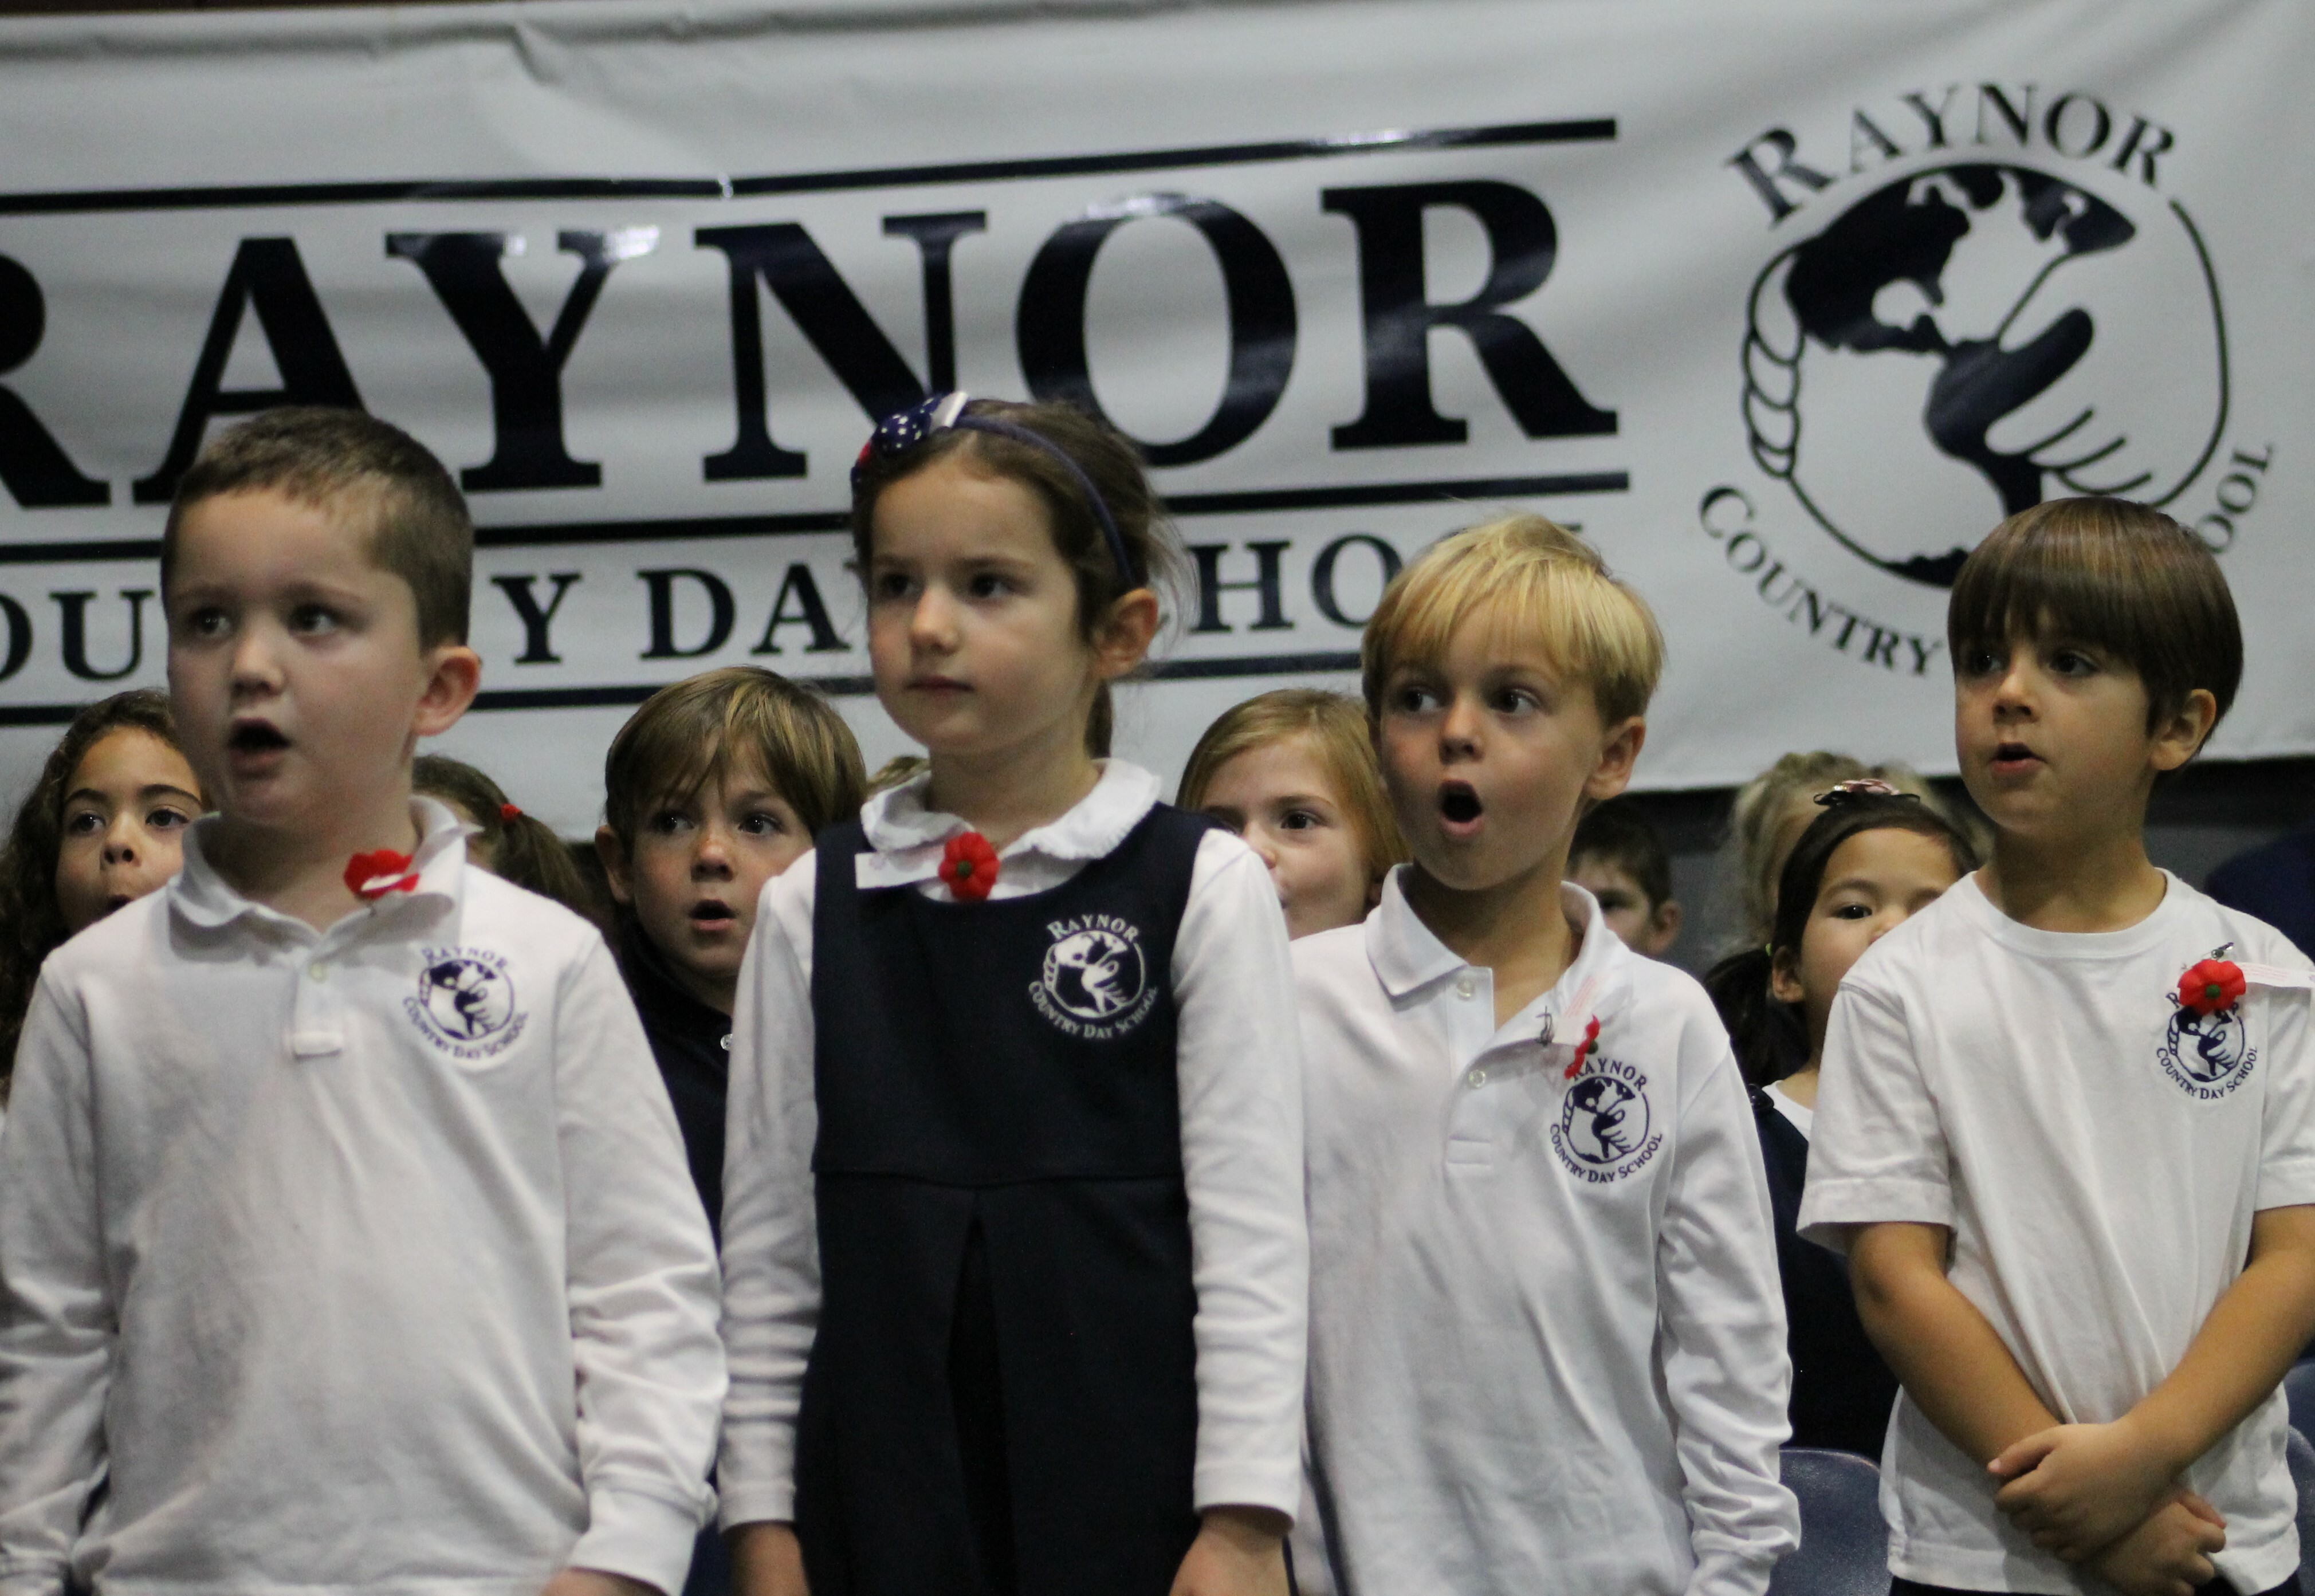 Kindergarten students, from left, C.J. Bale, Samantha Gorny, Miller Sumwalt and Levi Beaver perform God Bless America at Raynor Country Day School's annual Veterans Day ceremony.